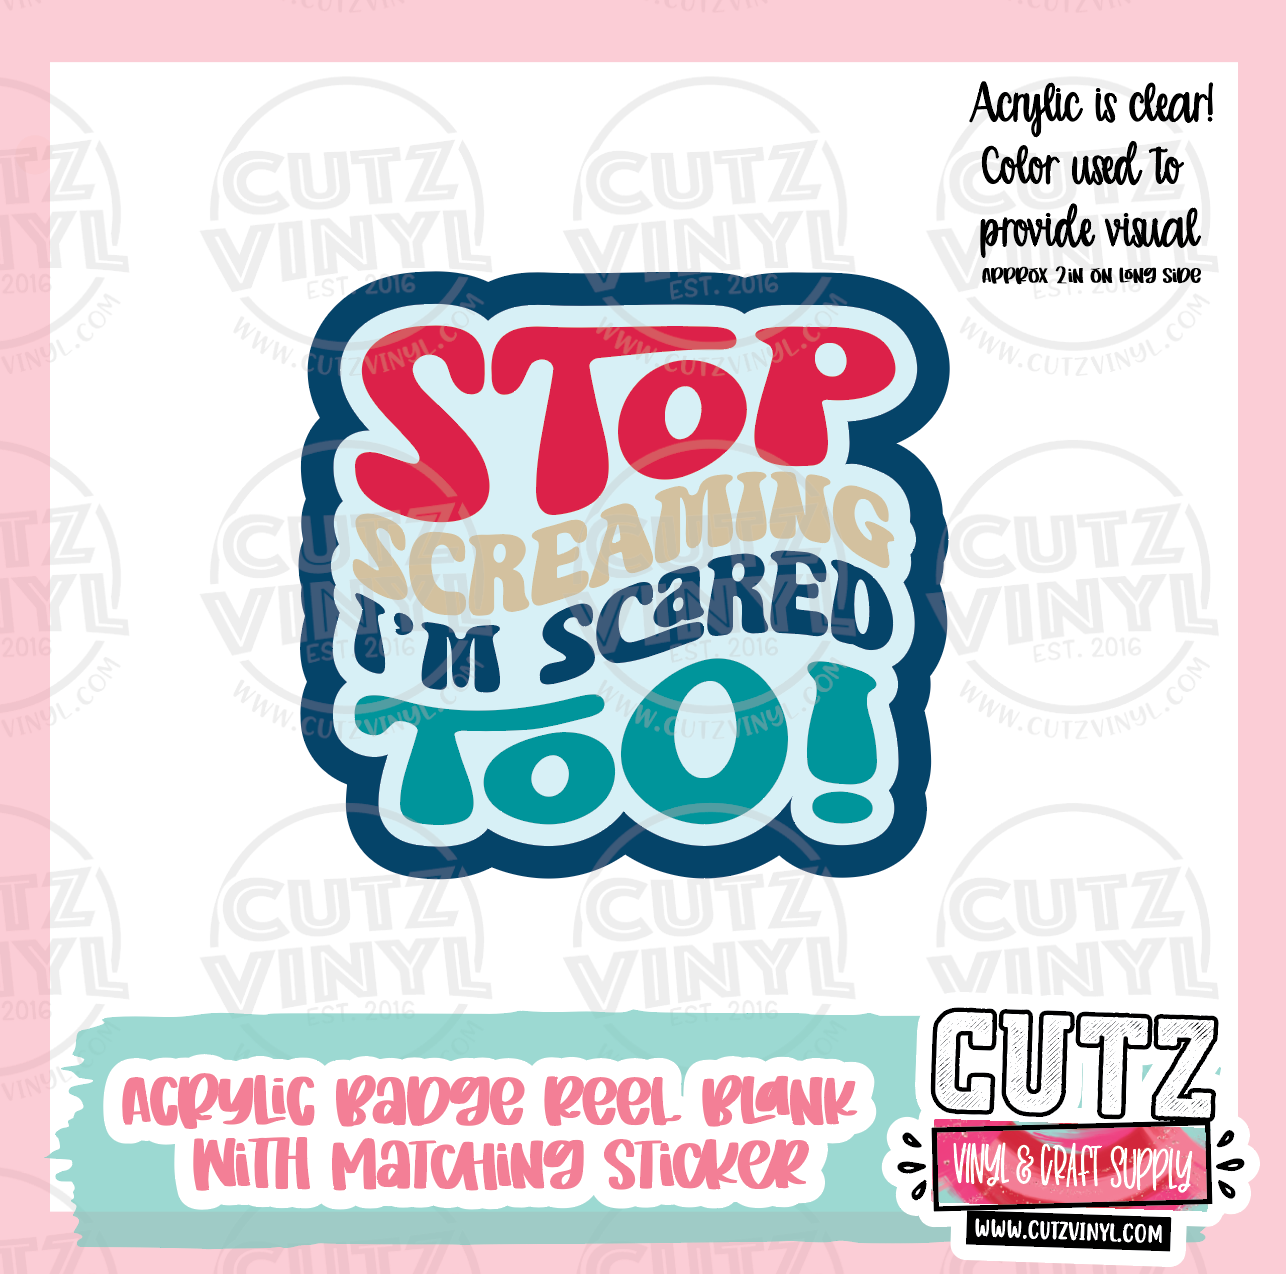 Stop Screaming I'm Scared Too - Acrylic Badge Reel Blank and Matching –  Cutz Vinyl and Craft Supplies